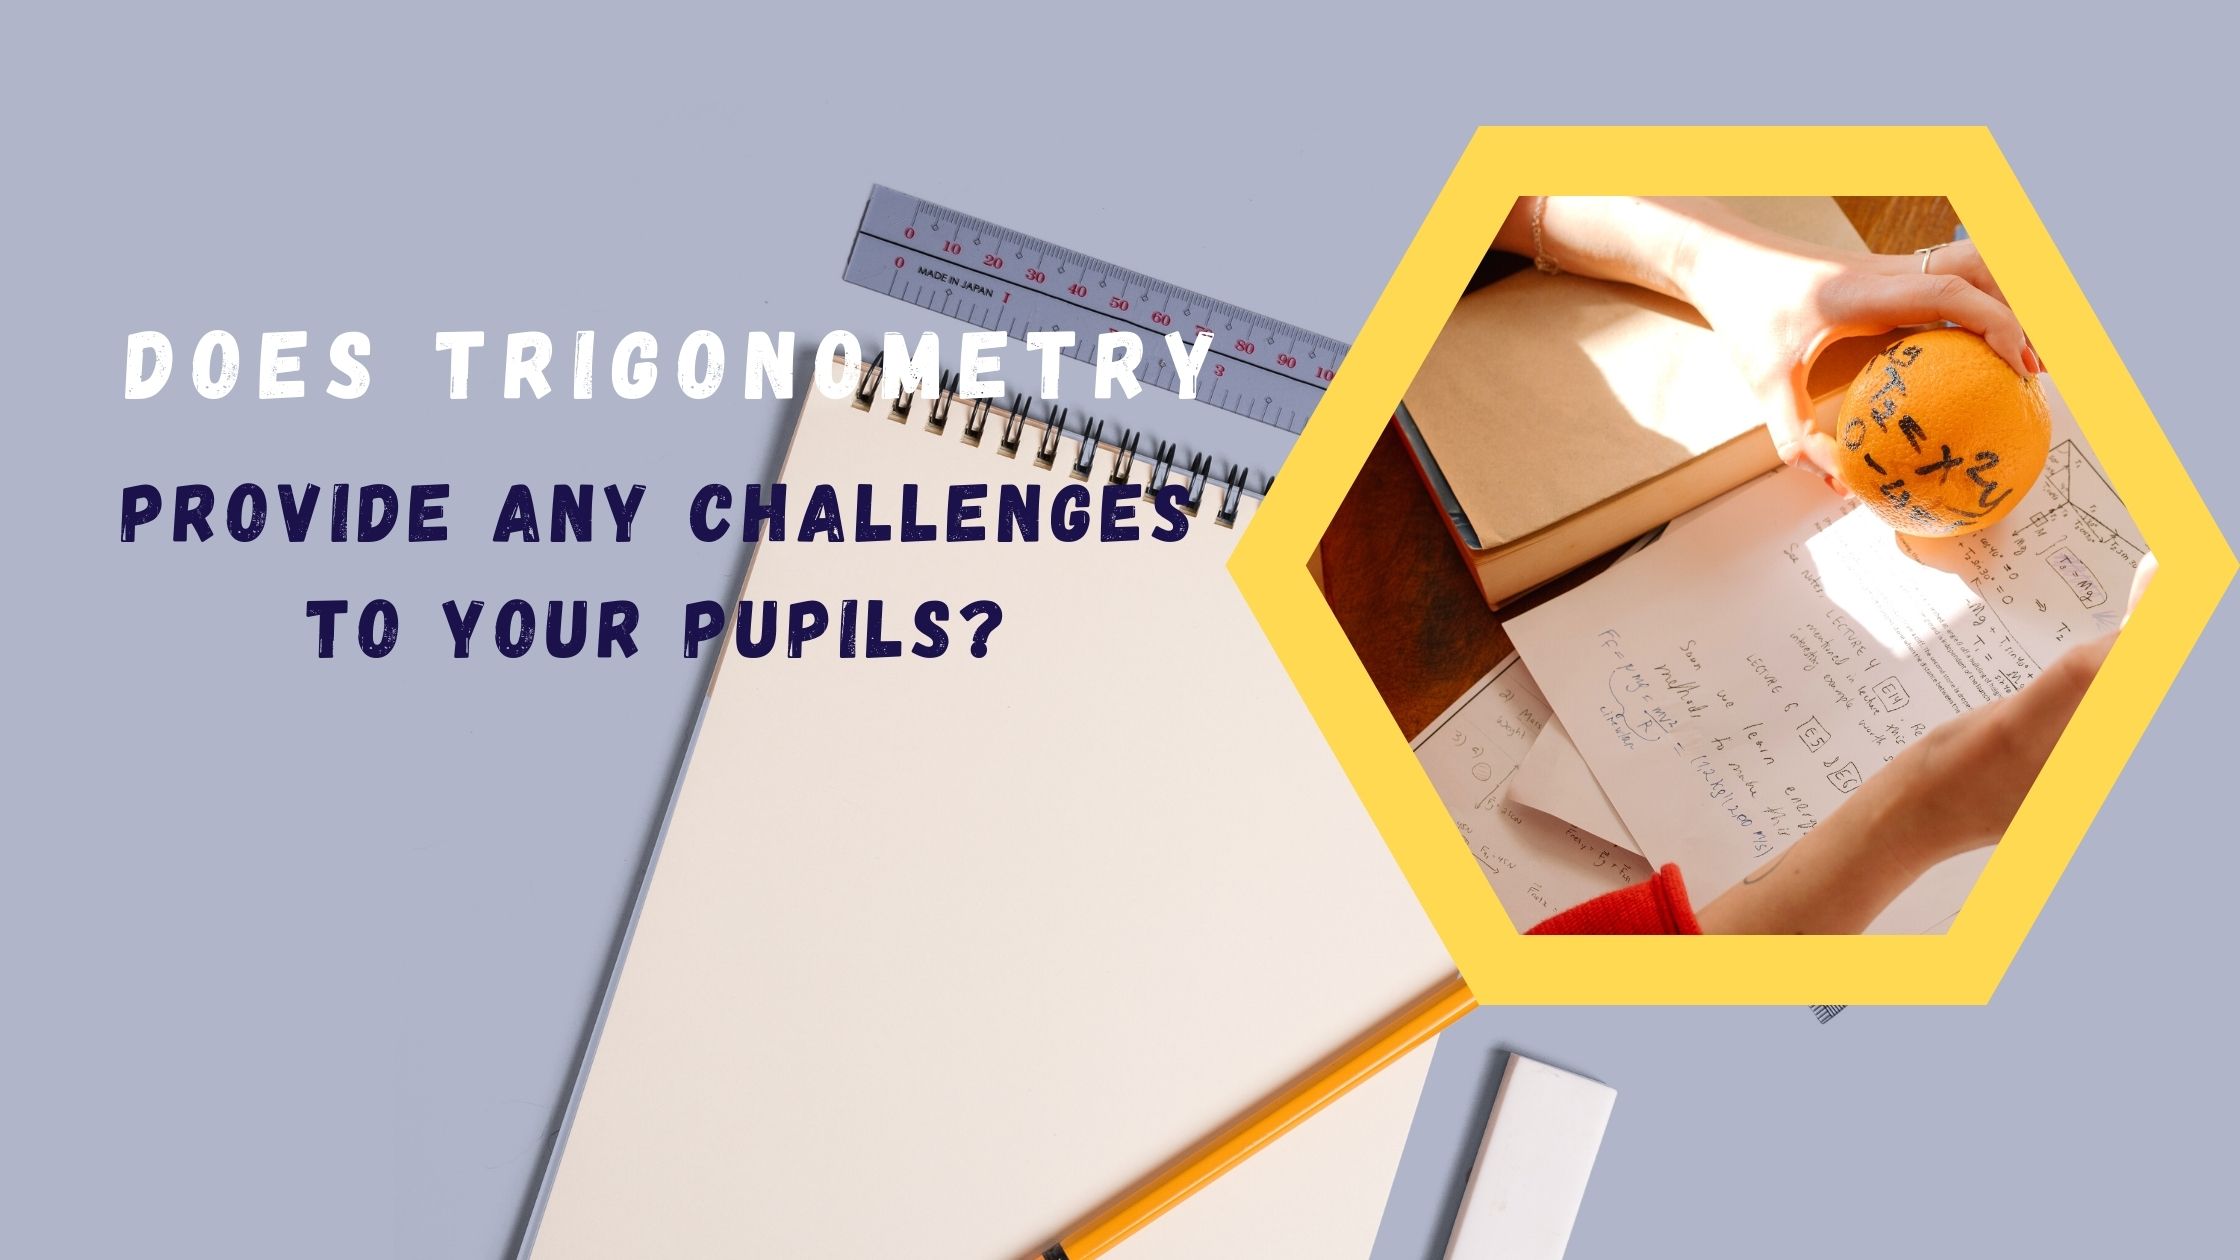 Does trigonometry provide any challenges to your pupils